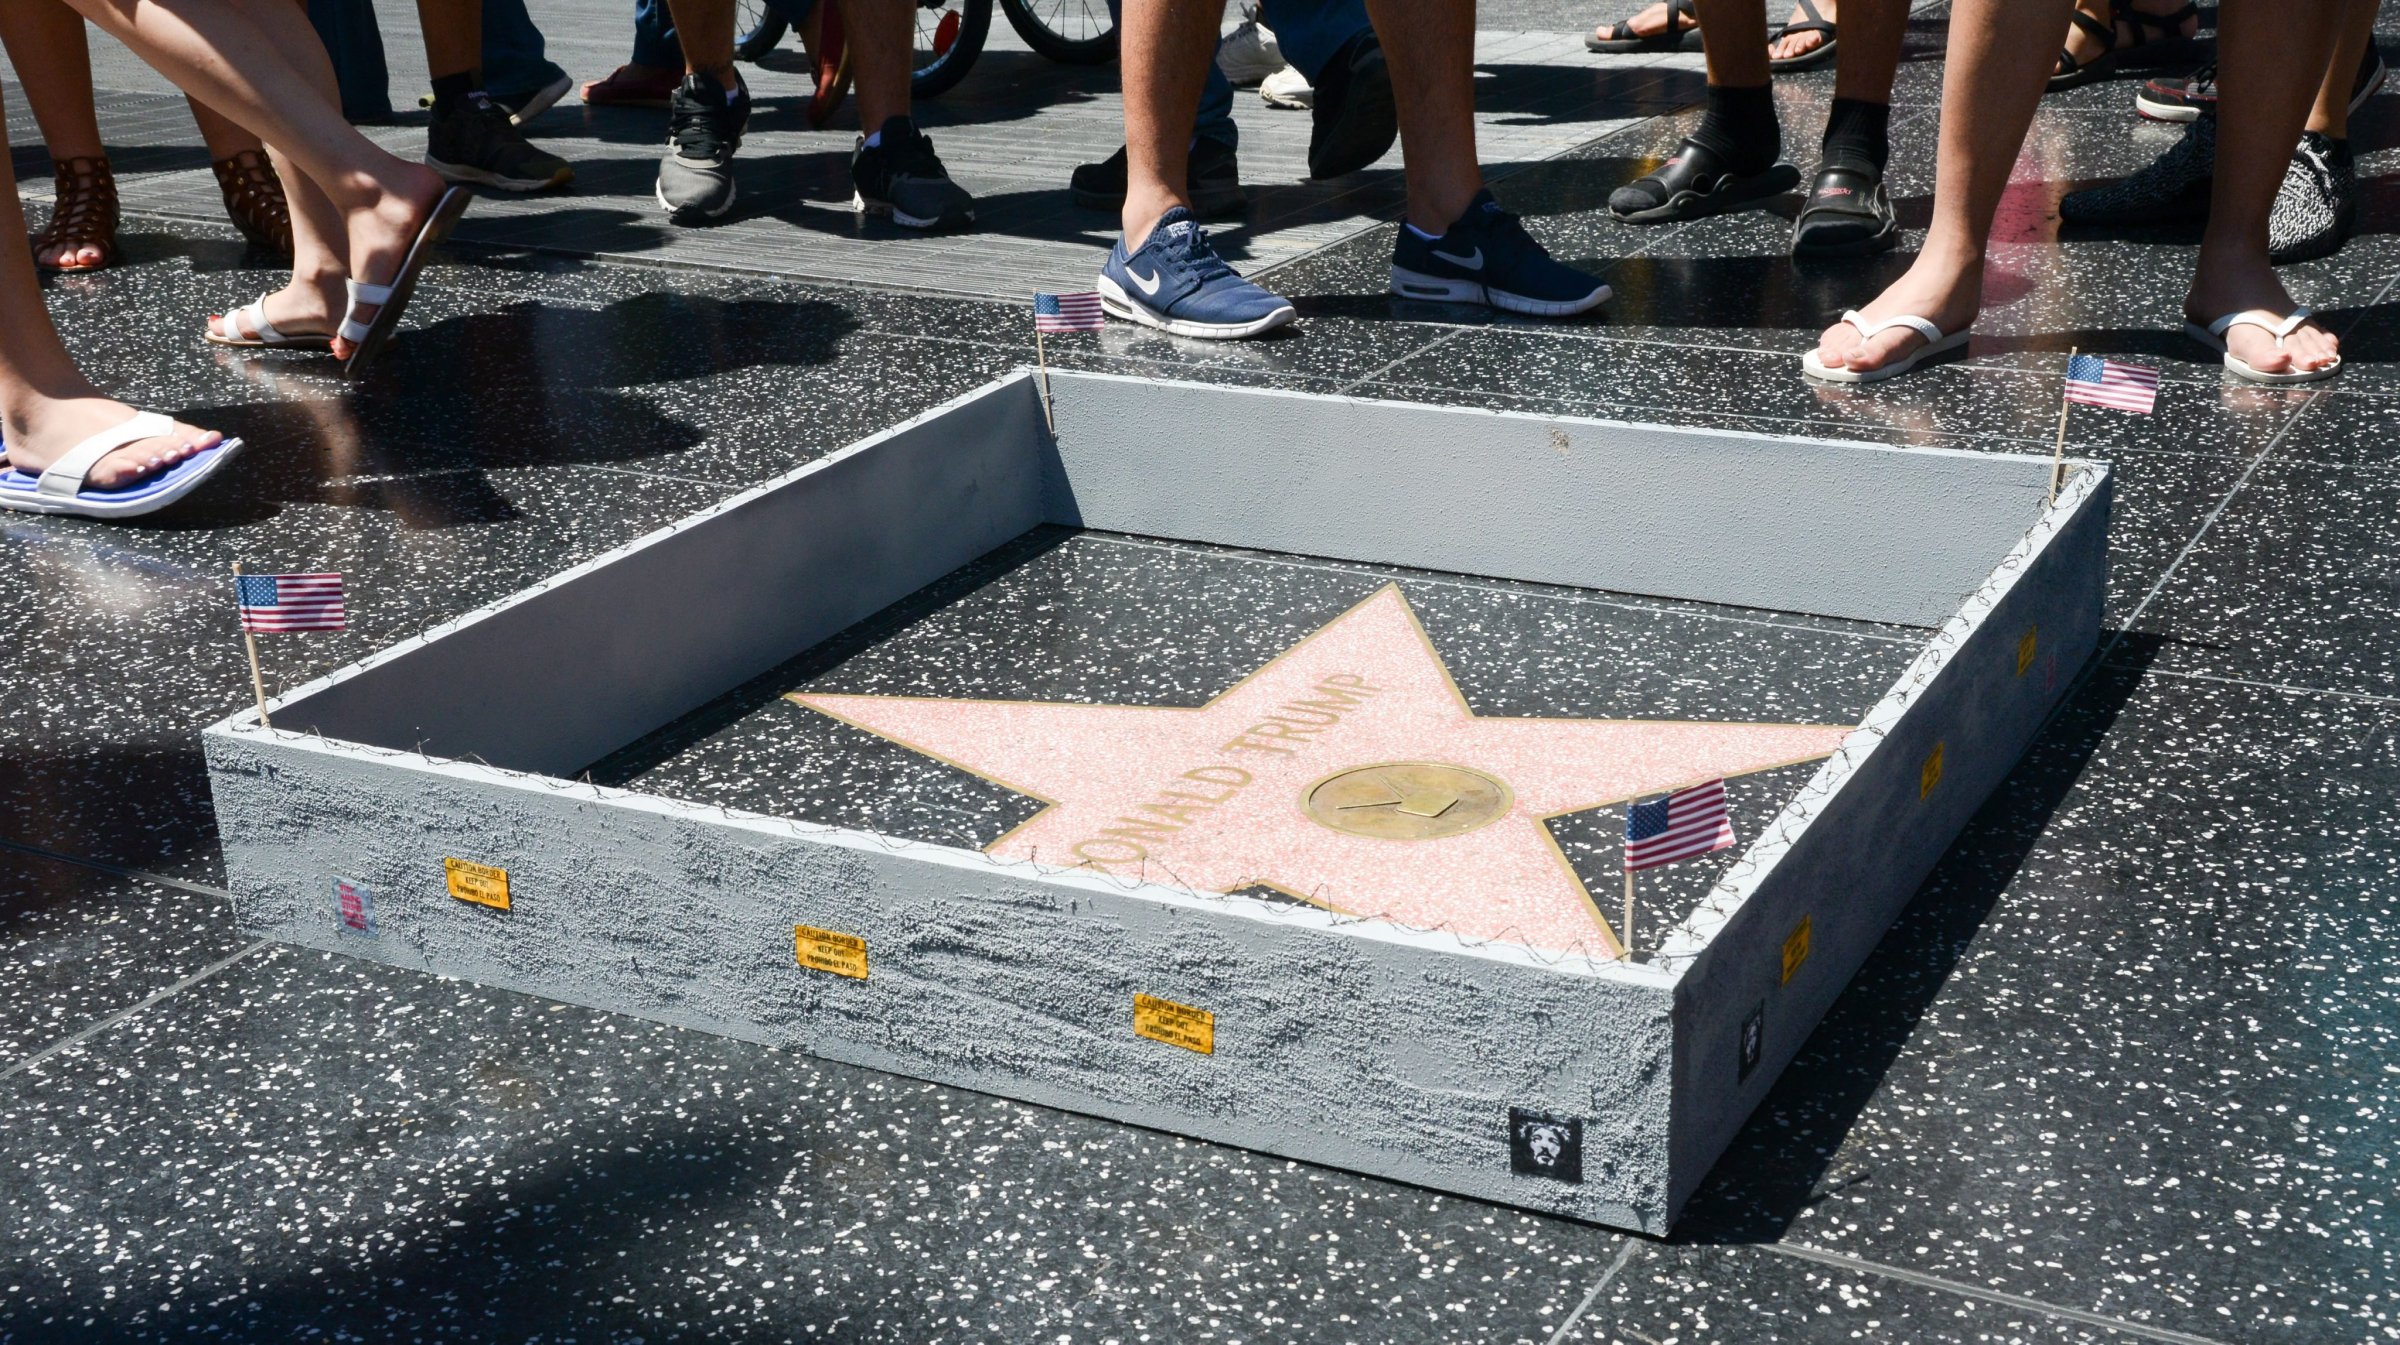 Donald Trump's Hollywood star in Los Angeles